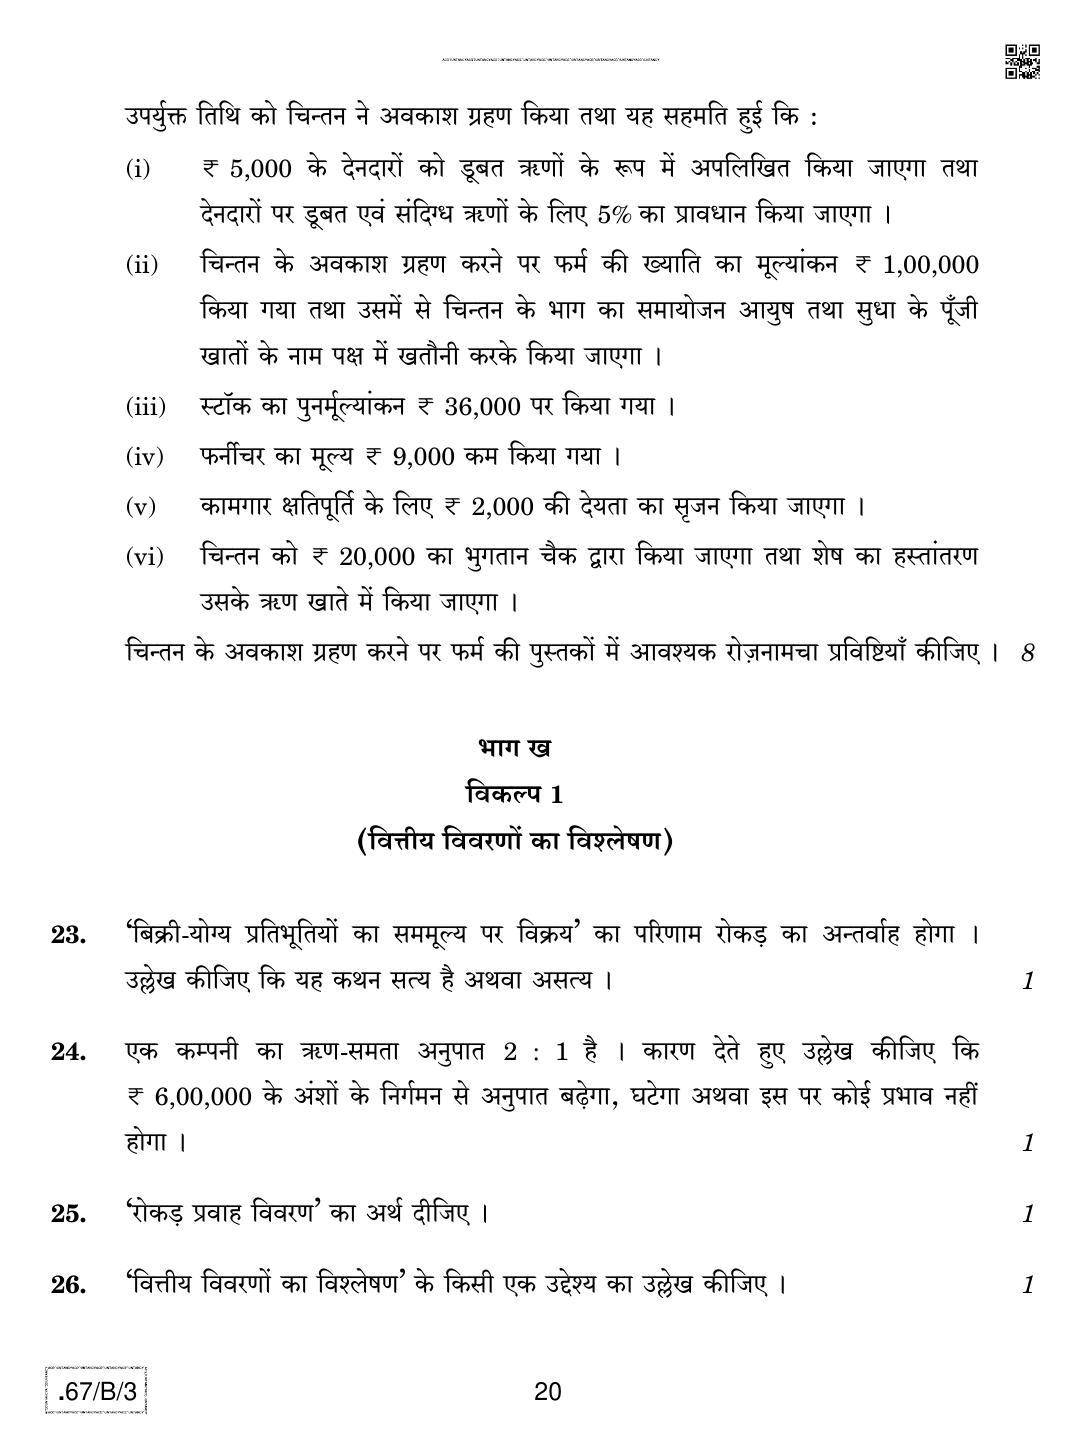 CBSE Class 12 67-C-3 - Accountancy 2020 Compartment Question Paper - Page 20